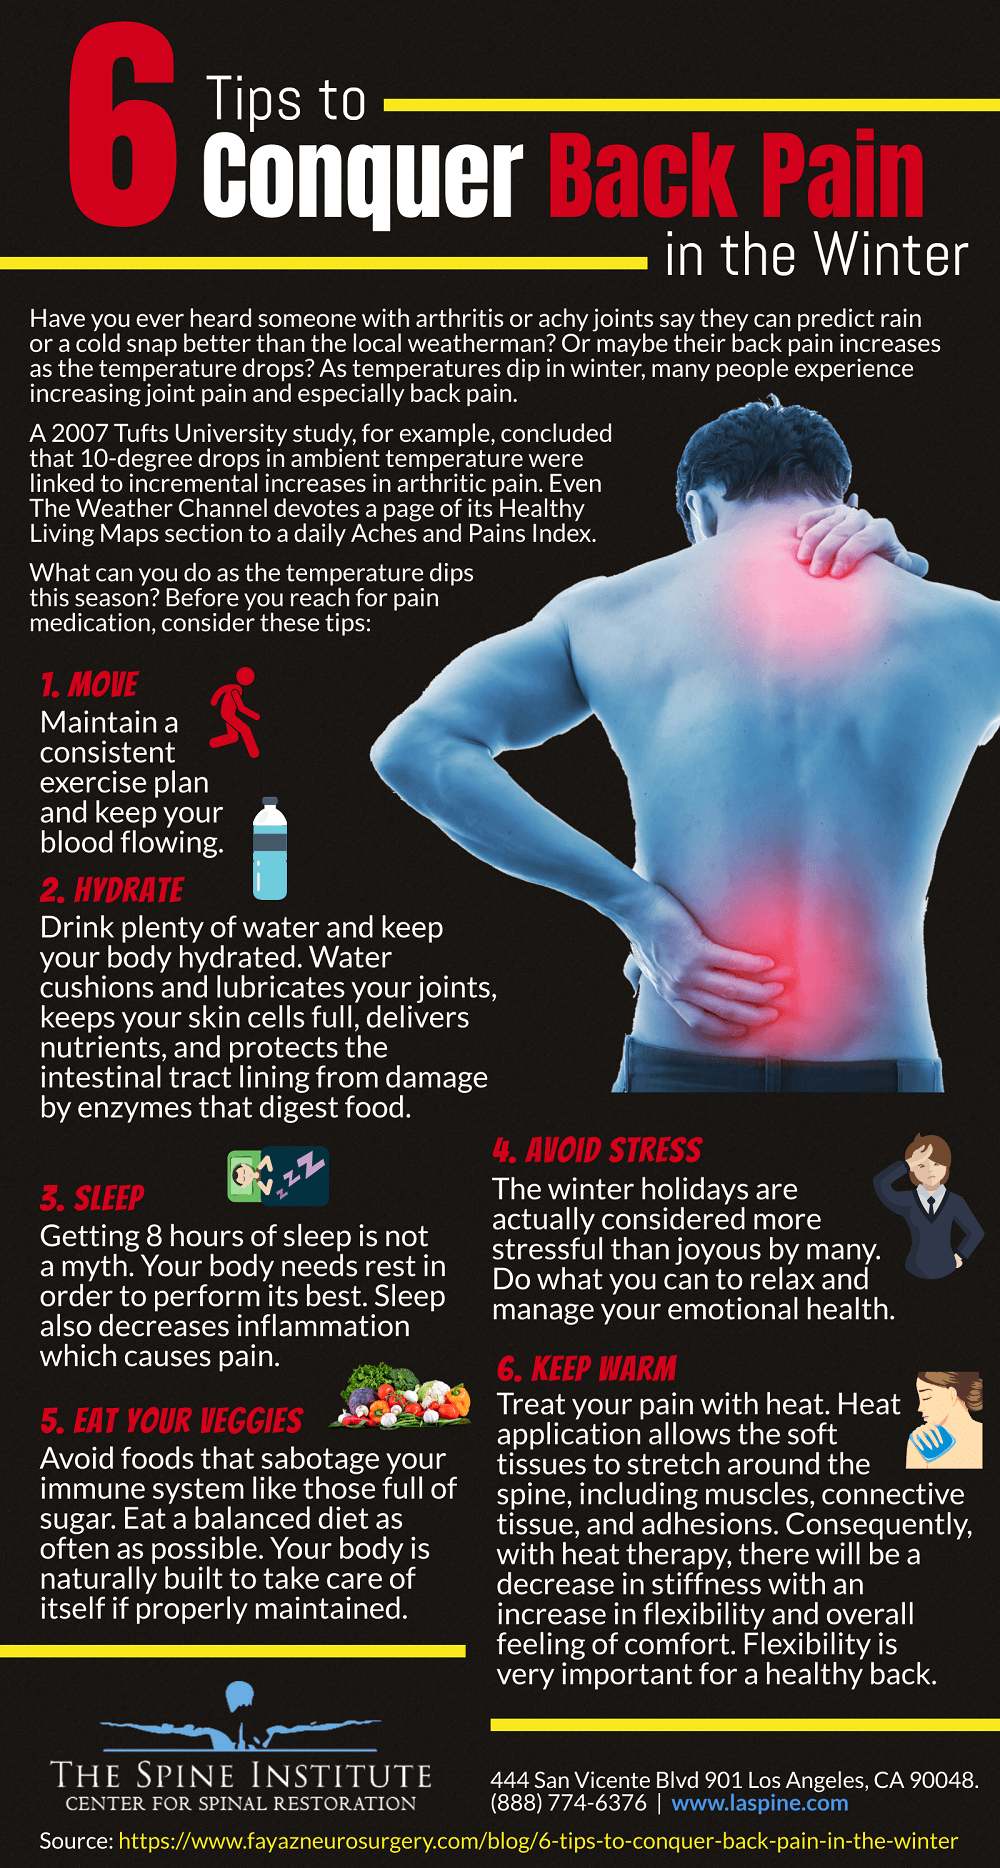 6 Ways to Alleviate Back Pain in the Winter Months [Infographic]